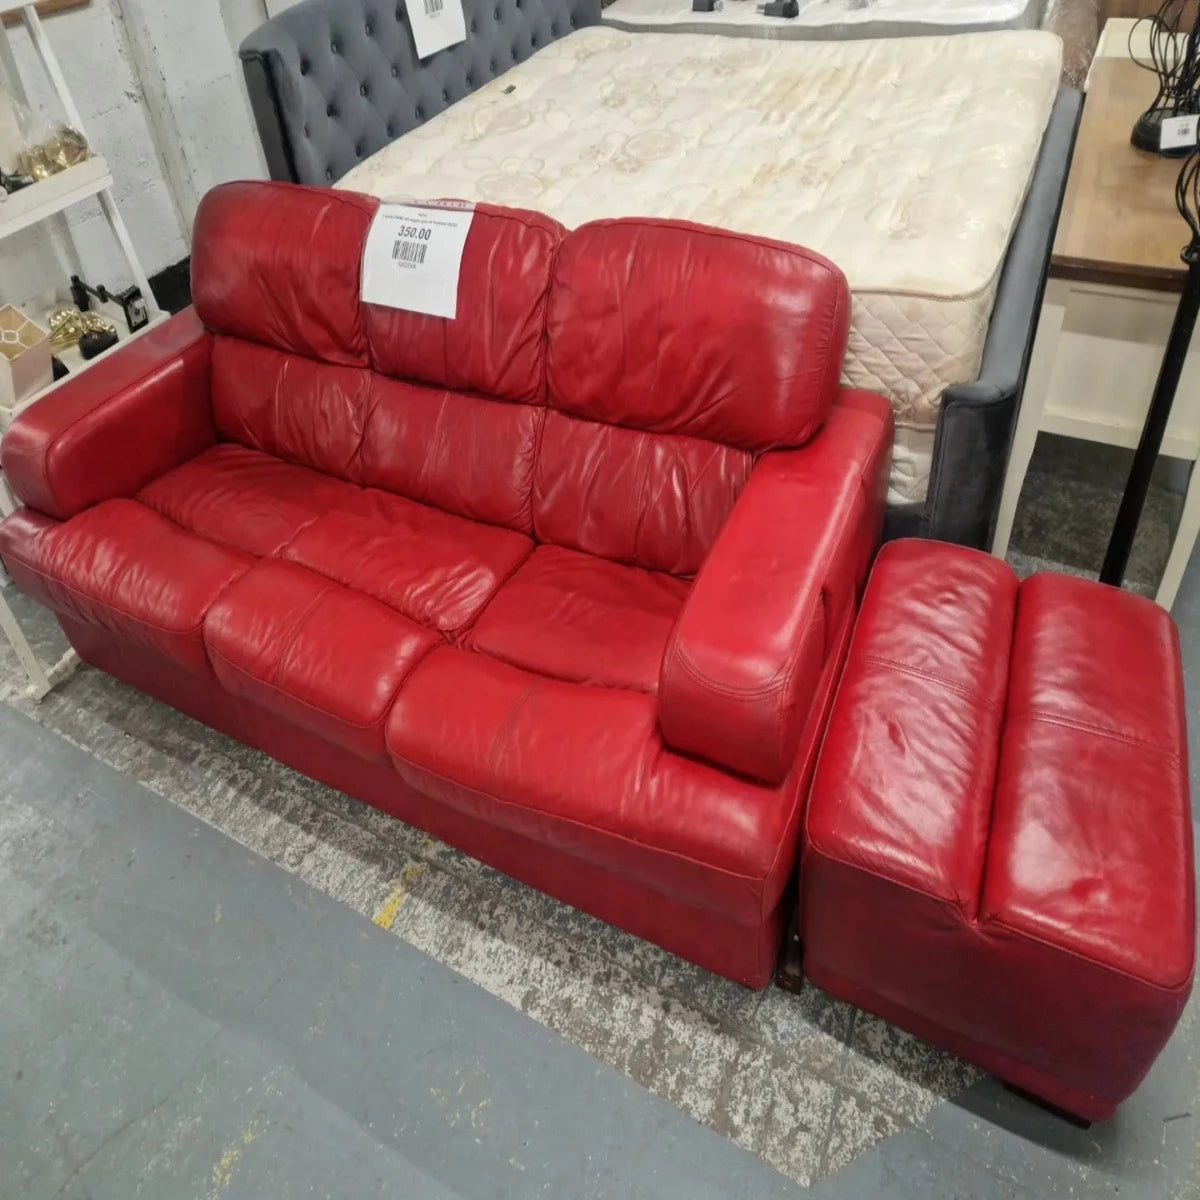 3 seater DARK red leather sofa cw footstool